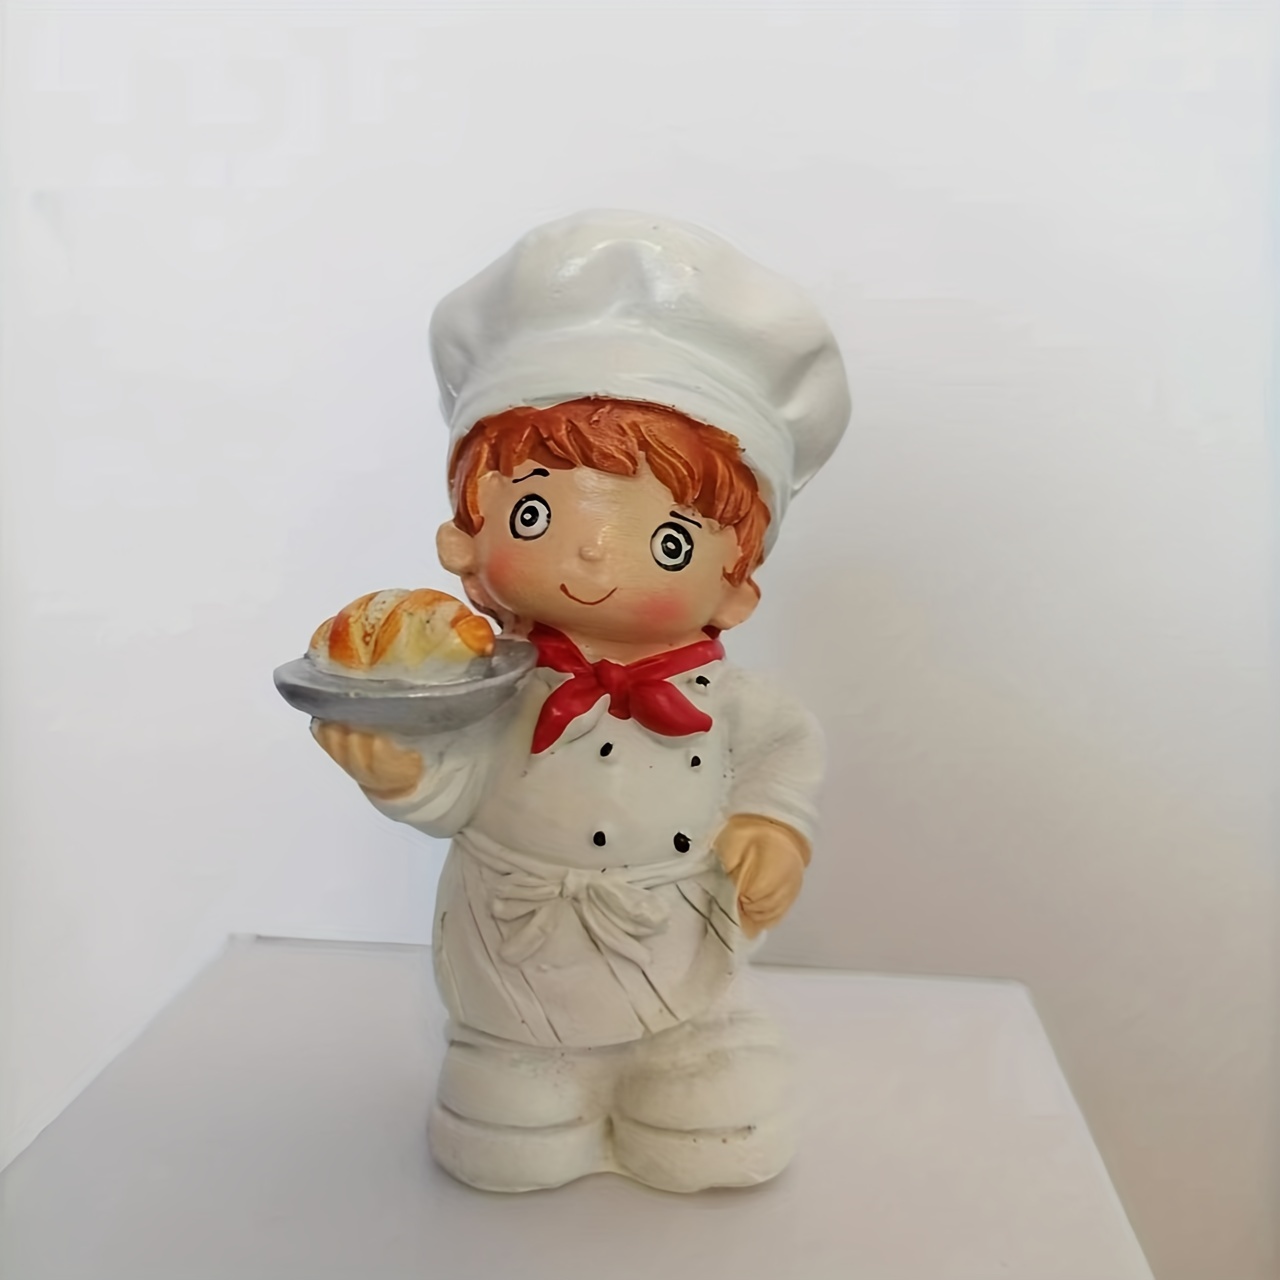 1pc Simple Modern Creative Resin Craft Gift, Cute Chef Holding Cake Pepper  Shaker, Including Bottle